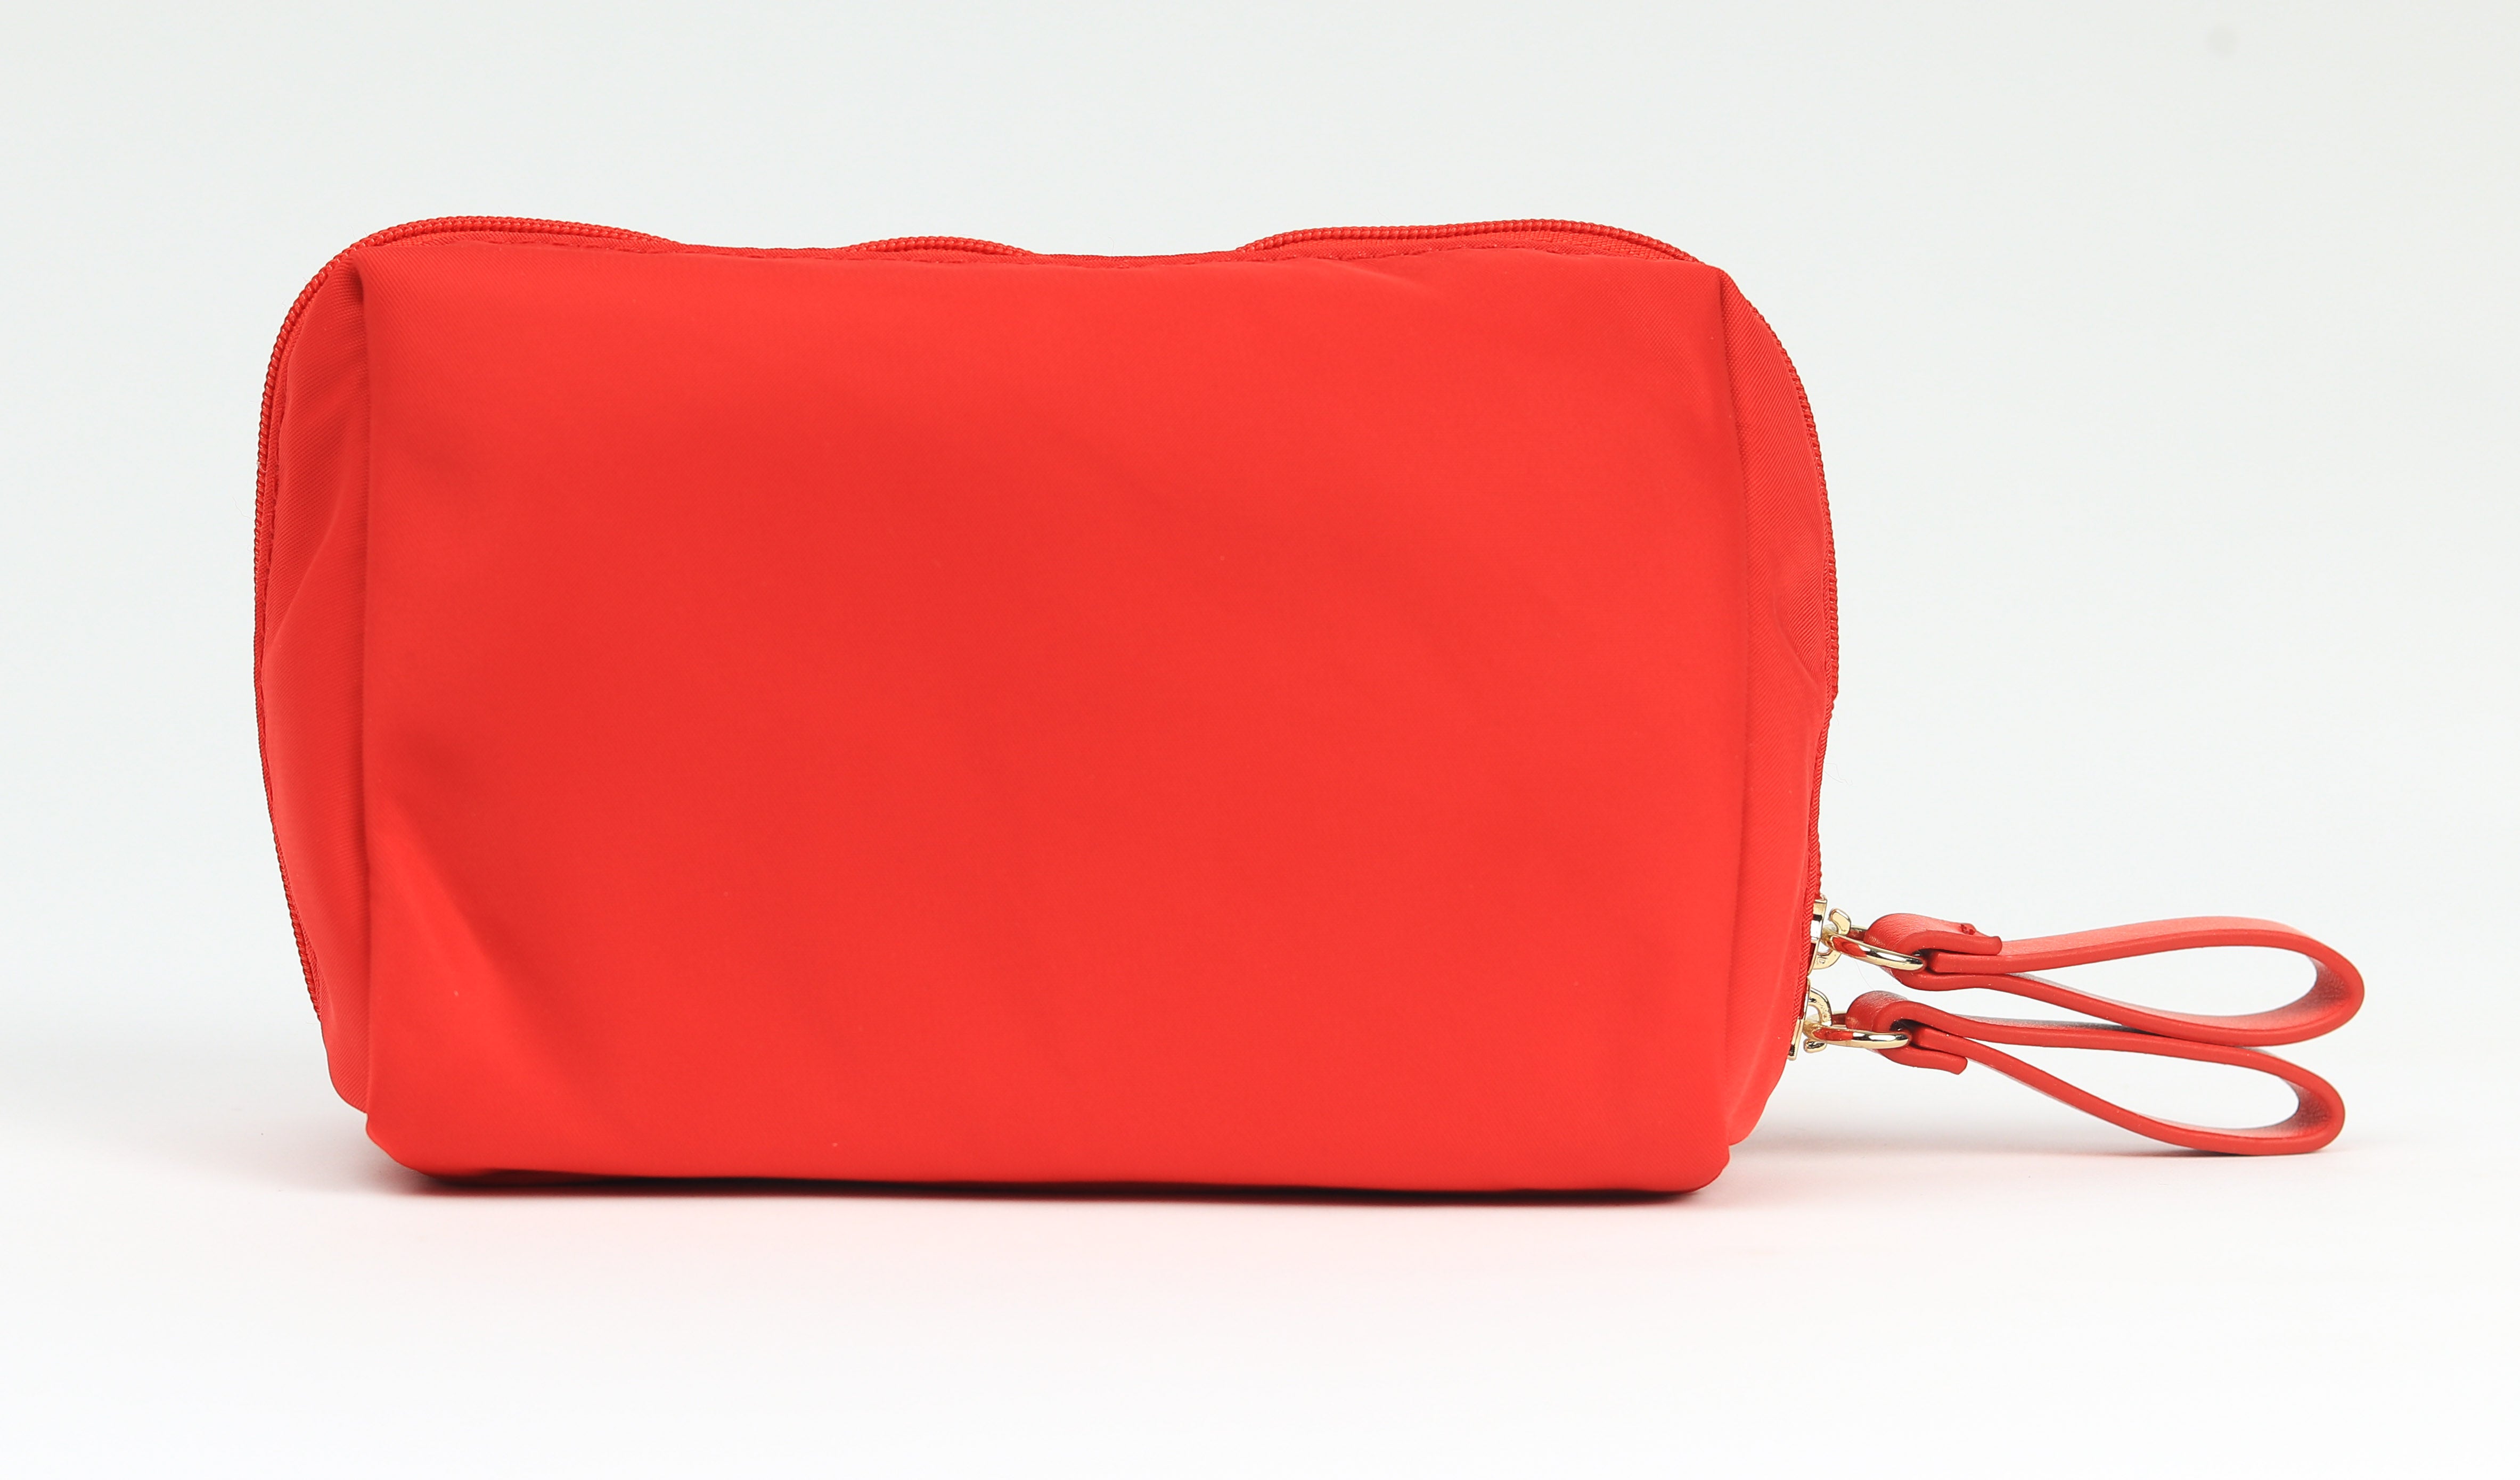 Travel Storage Bag Manufacturer in India - The Red Bag